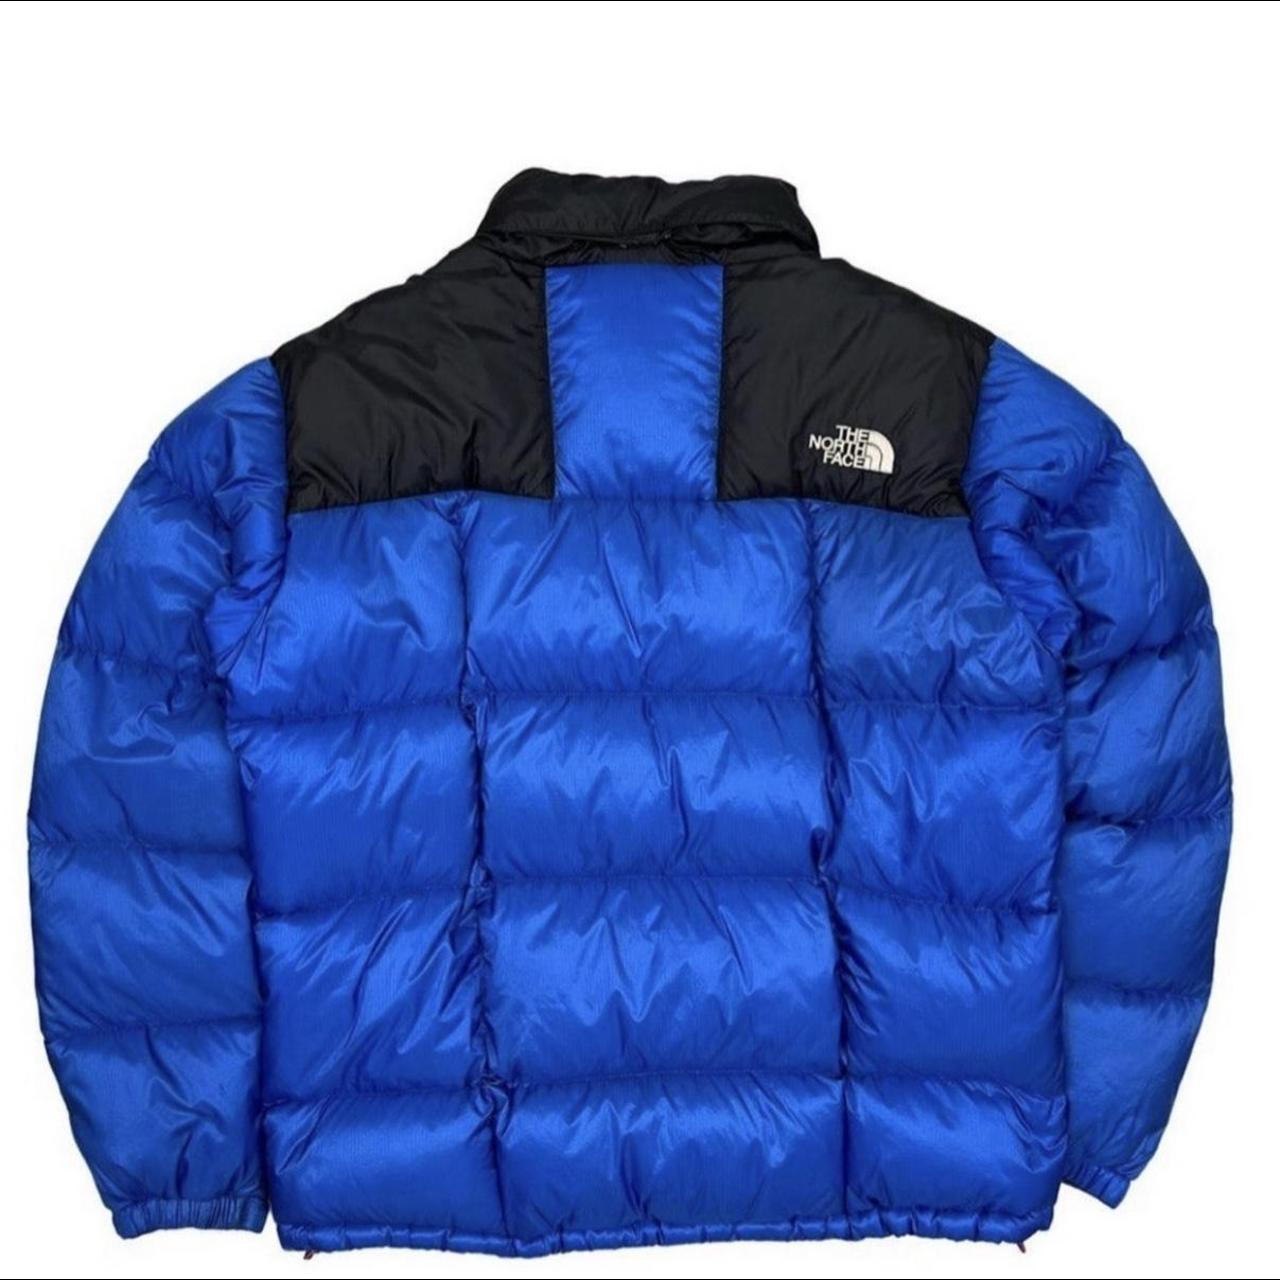 The North Face Men's Blue and Black Jacket (2)